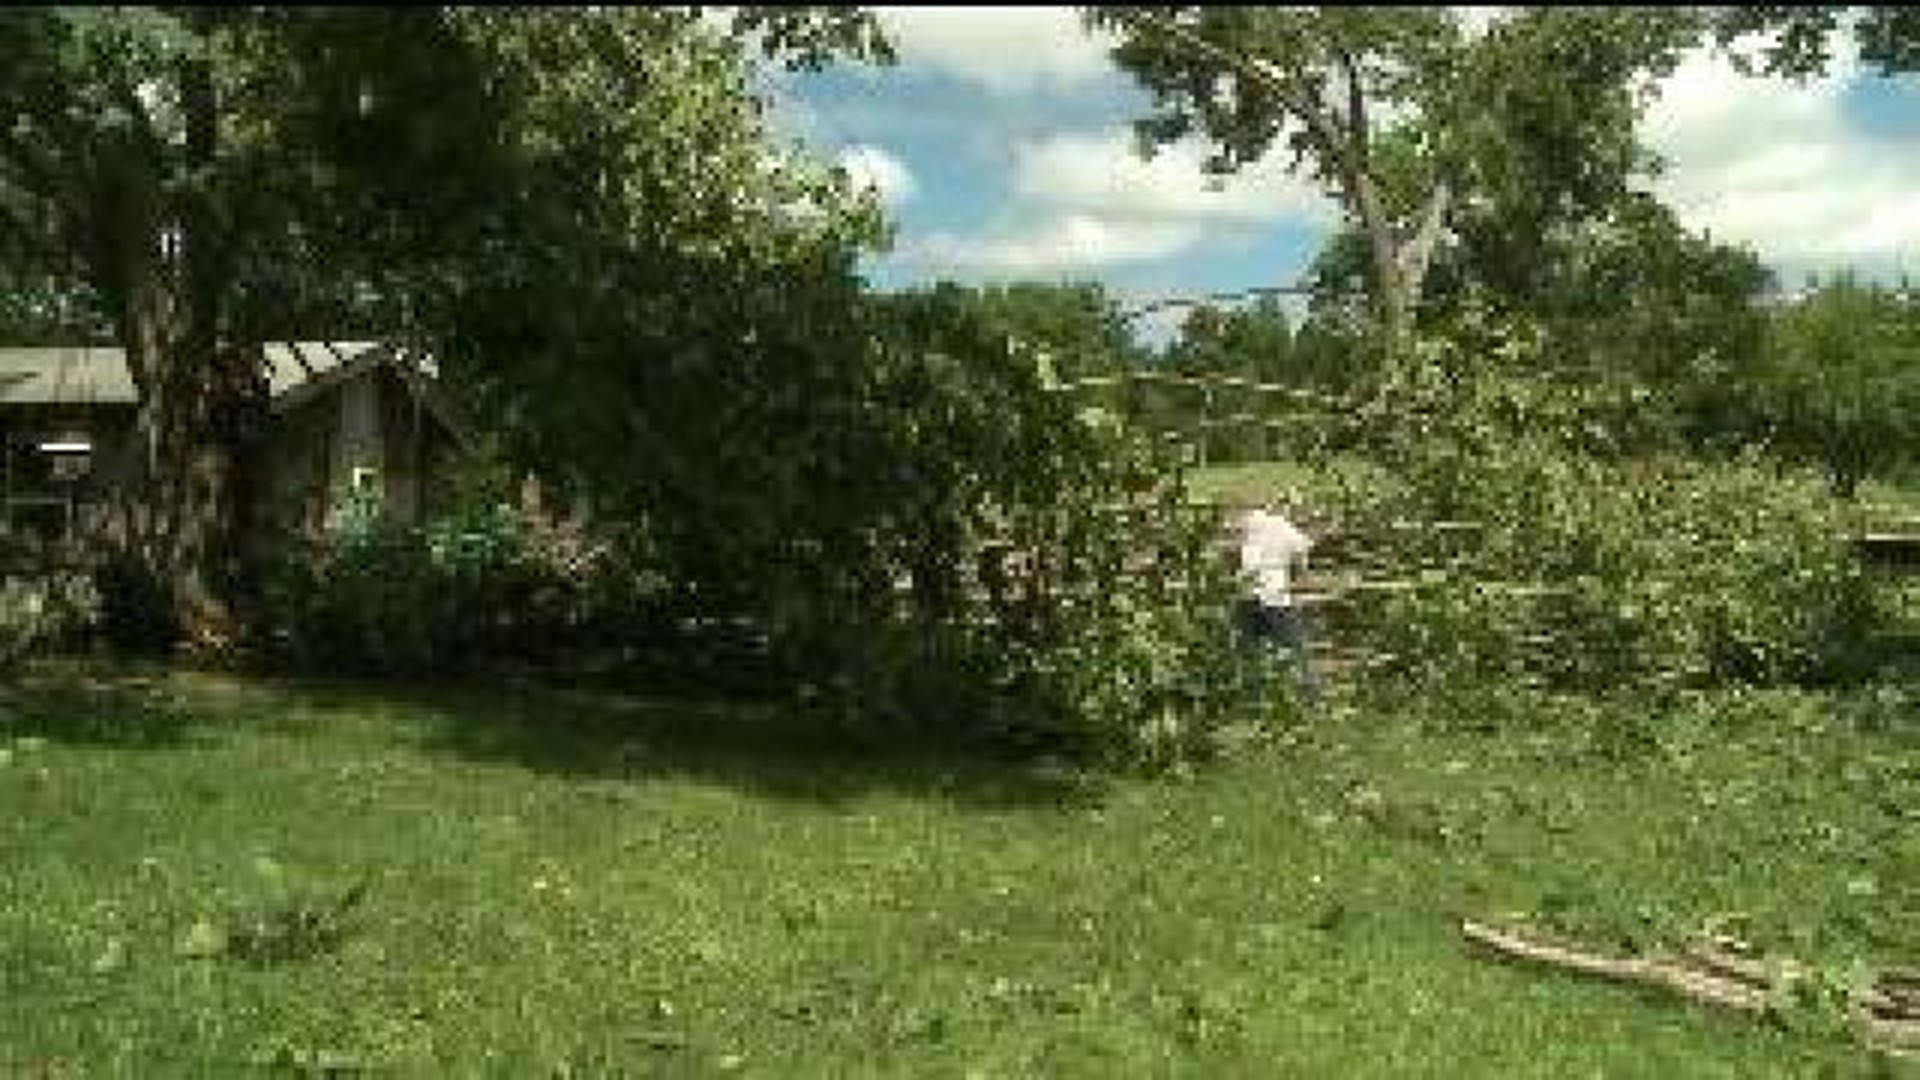 Storm Cleanup on the Fourth of July